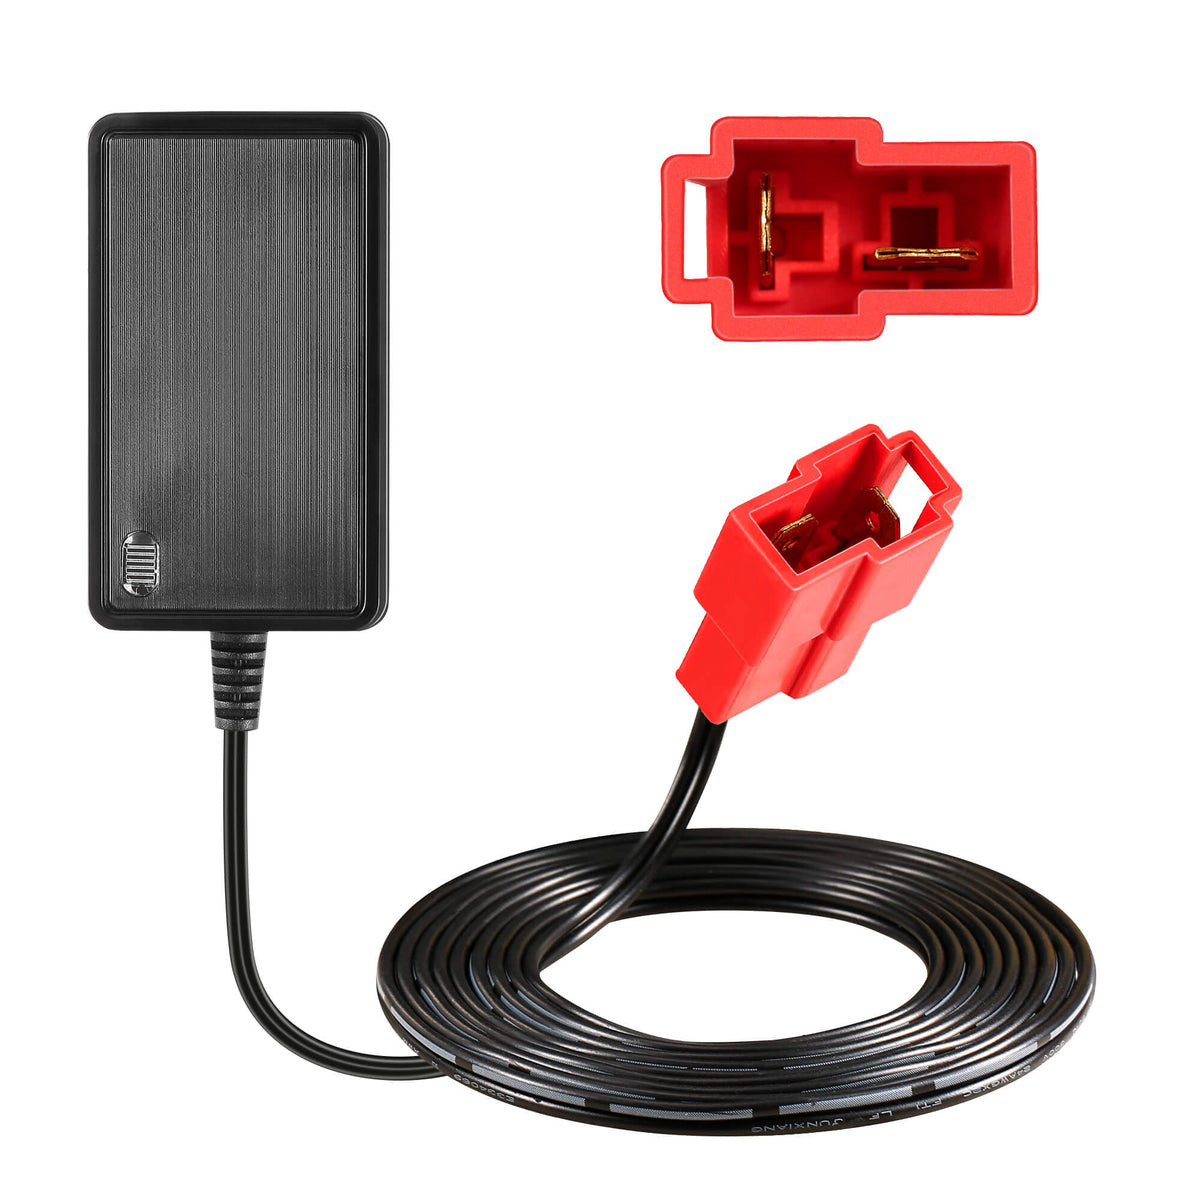 6V Charger with Square Plug for 6V Ride on Car